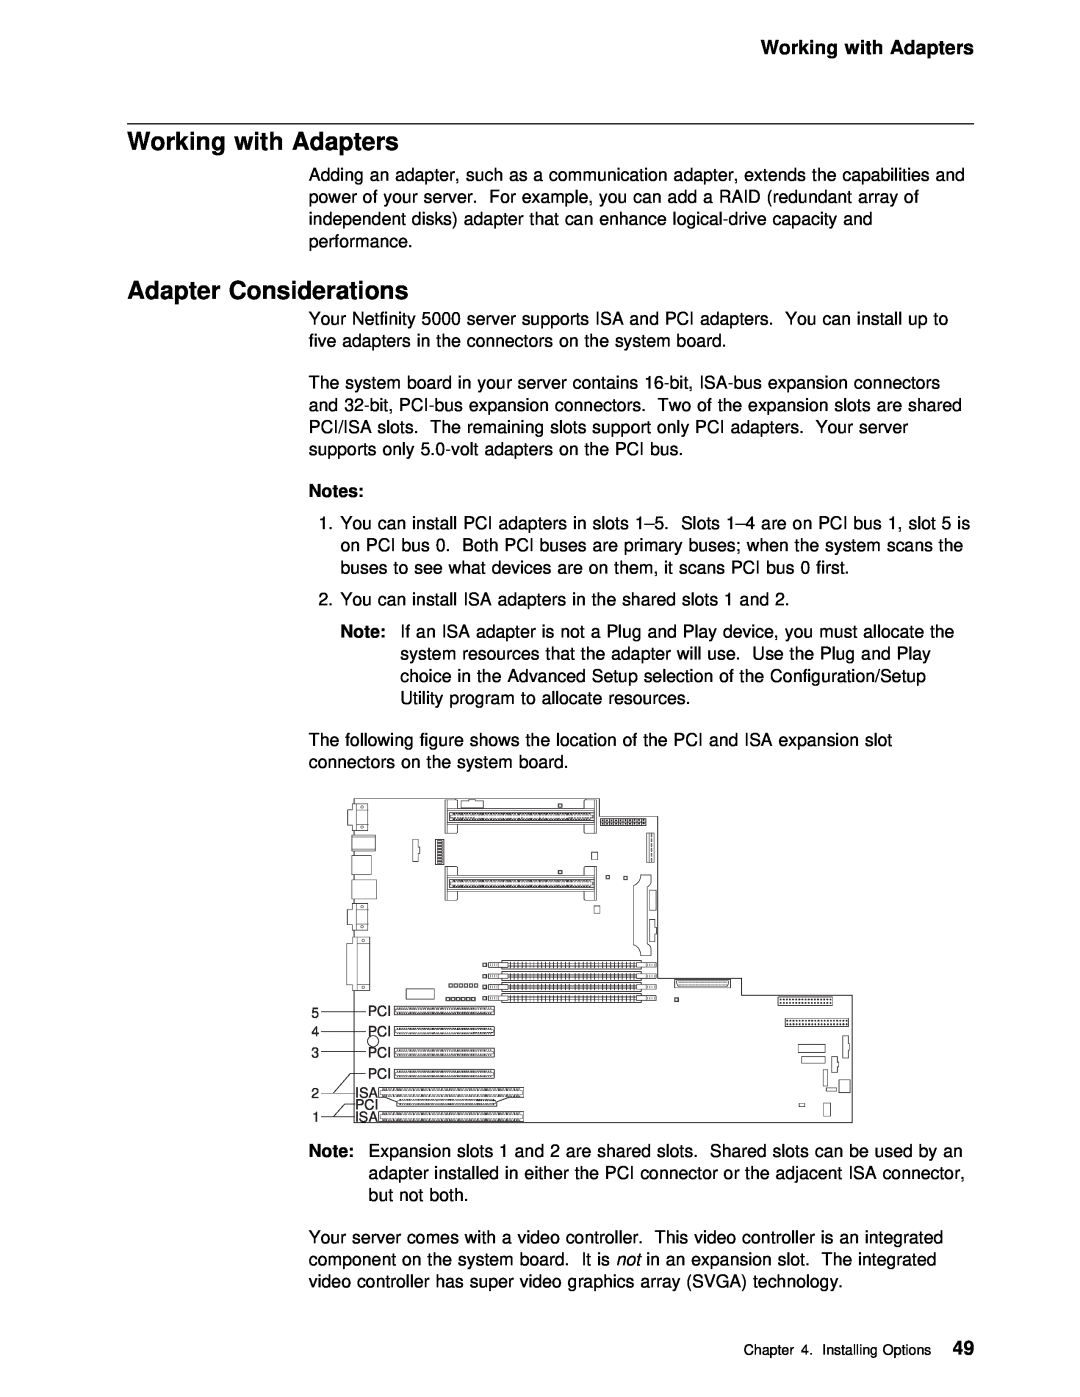 IBM 5000 manual Working with Adapters, Adapter Considerations 